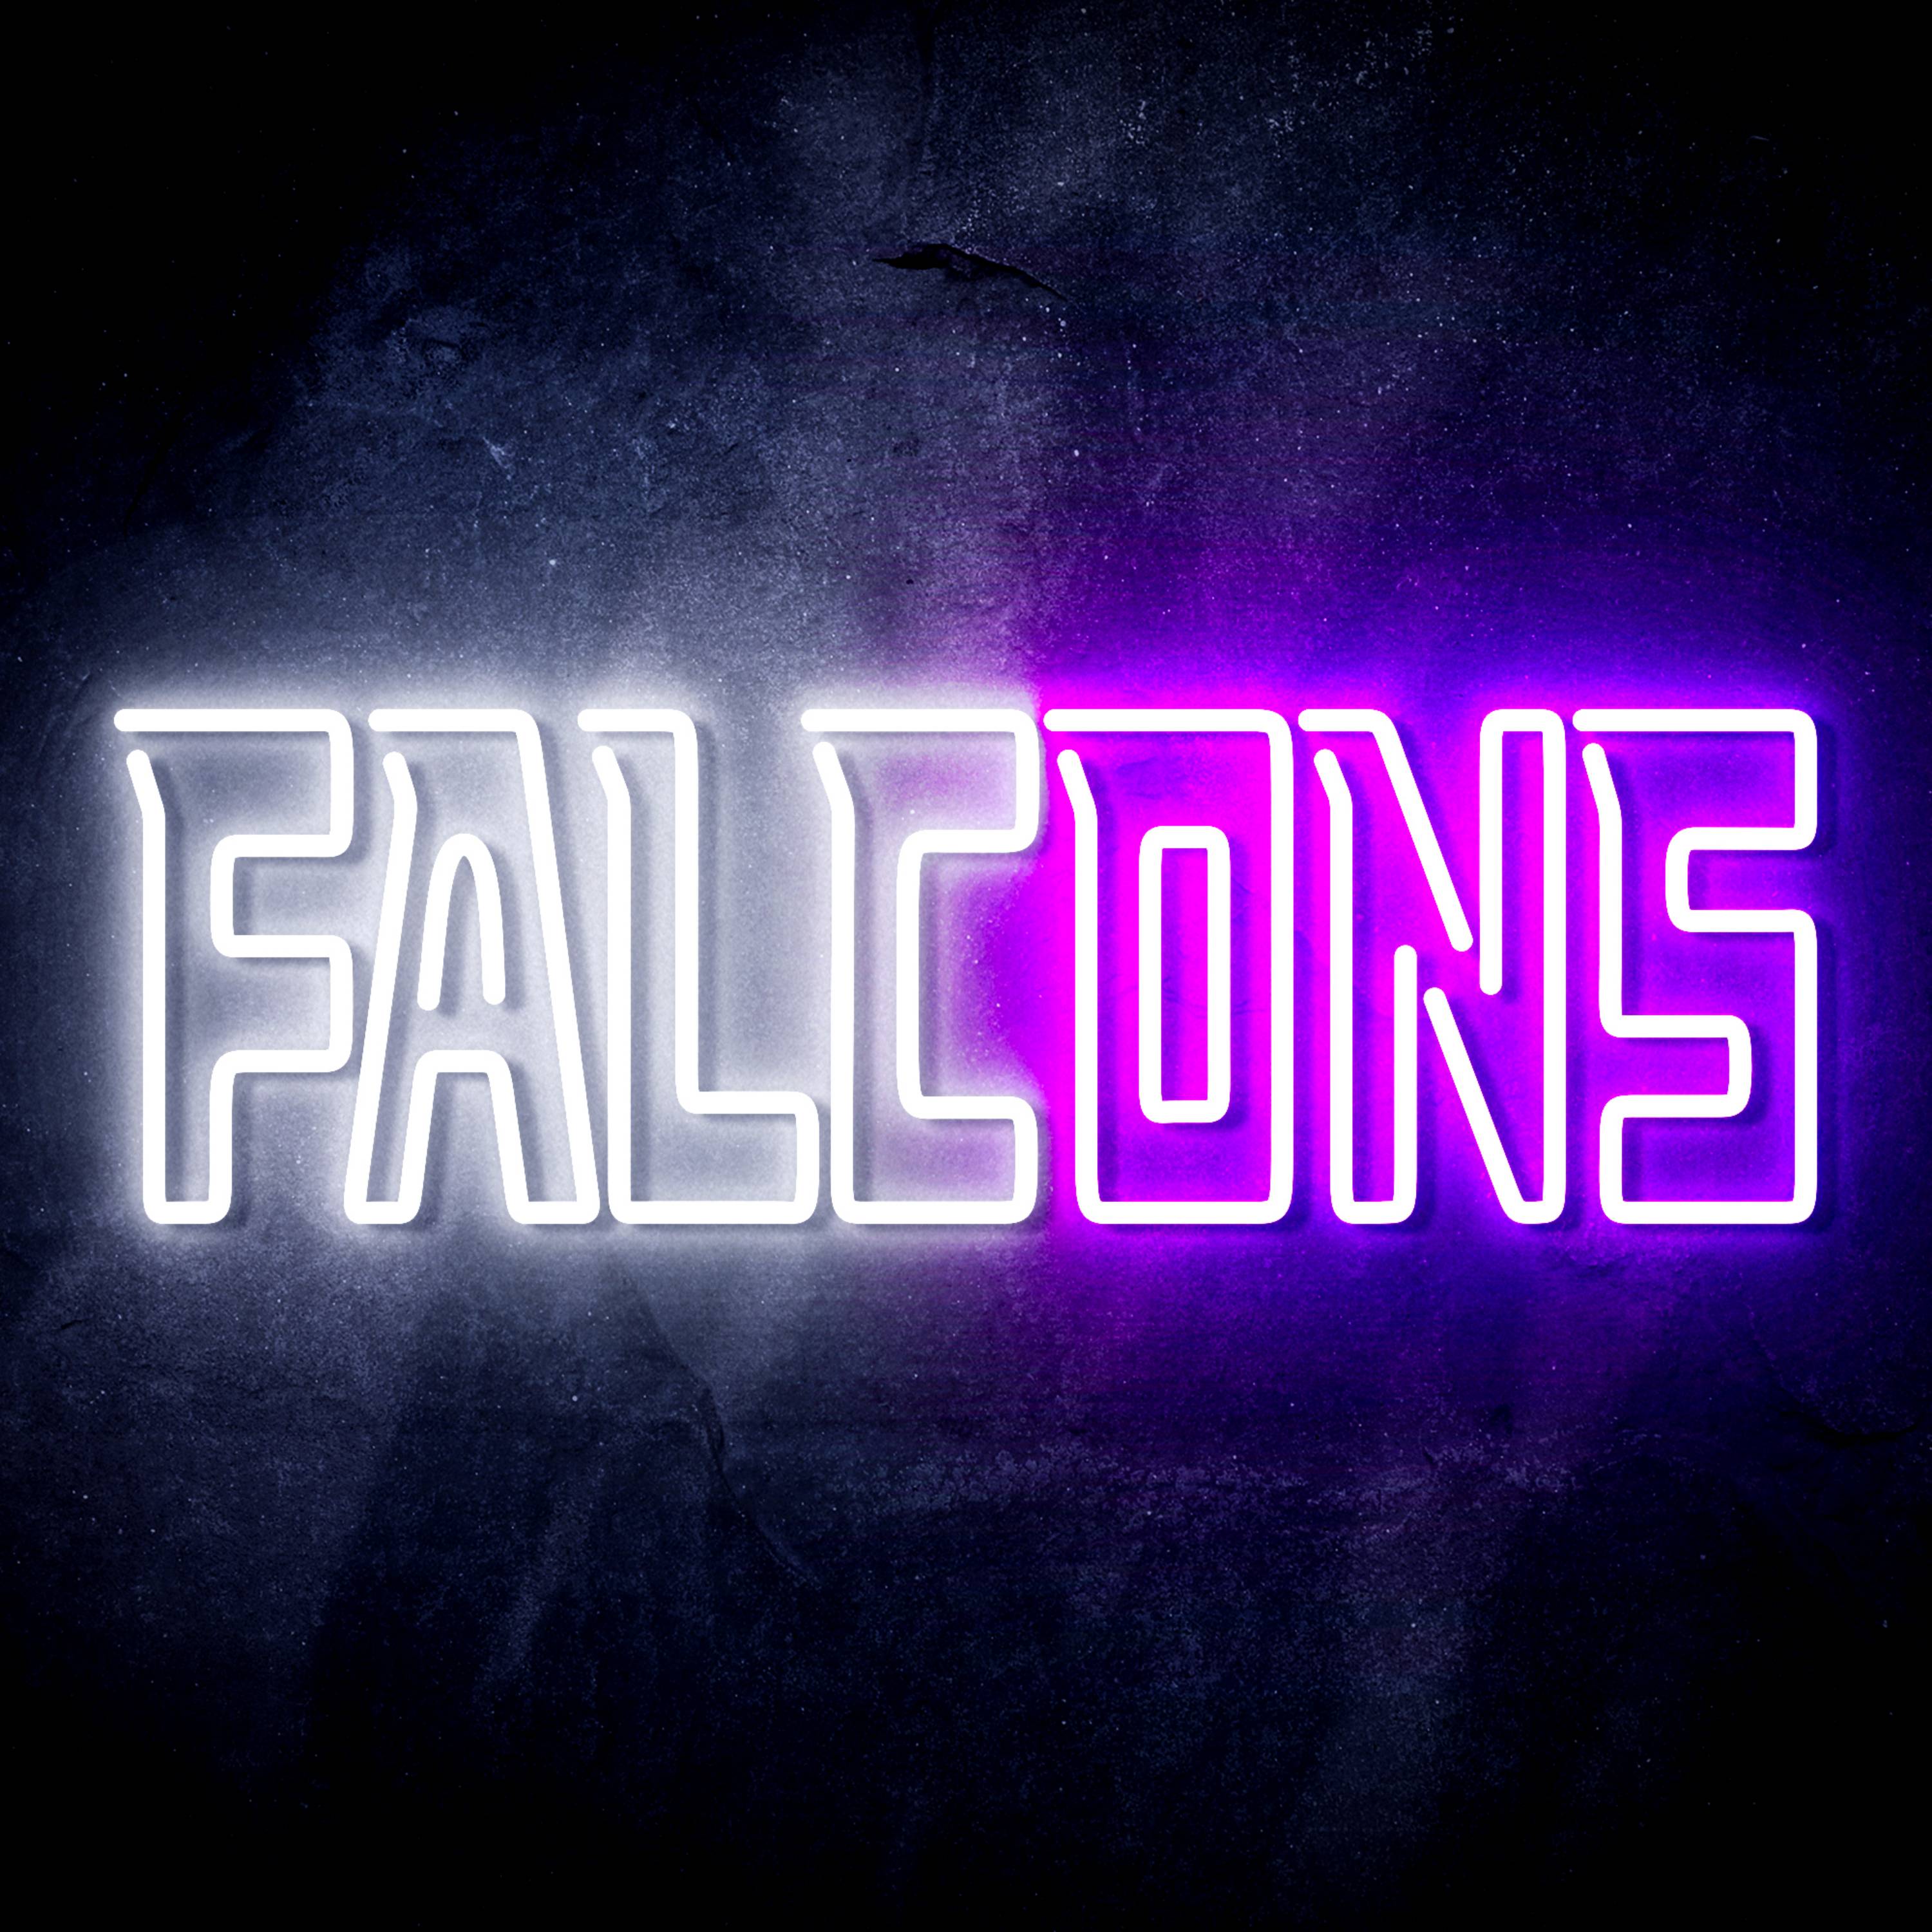 NFL FALCONS LED Neon Sign